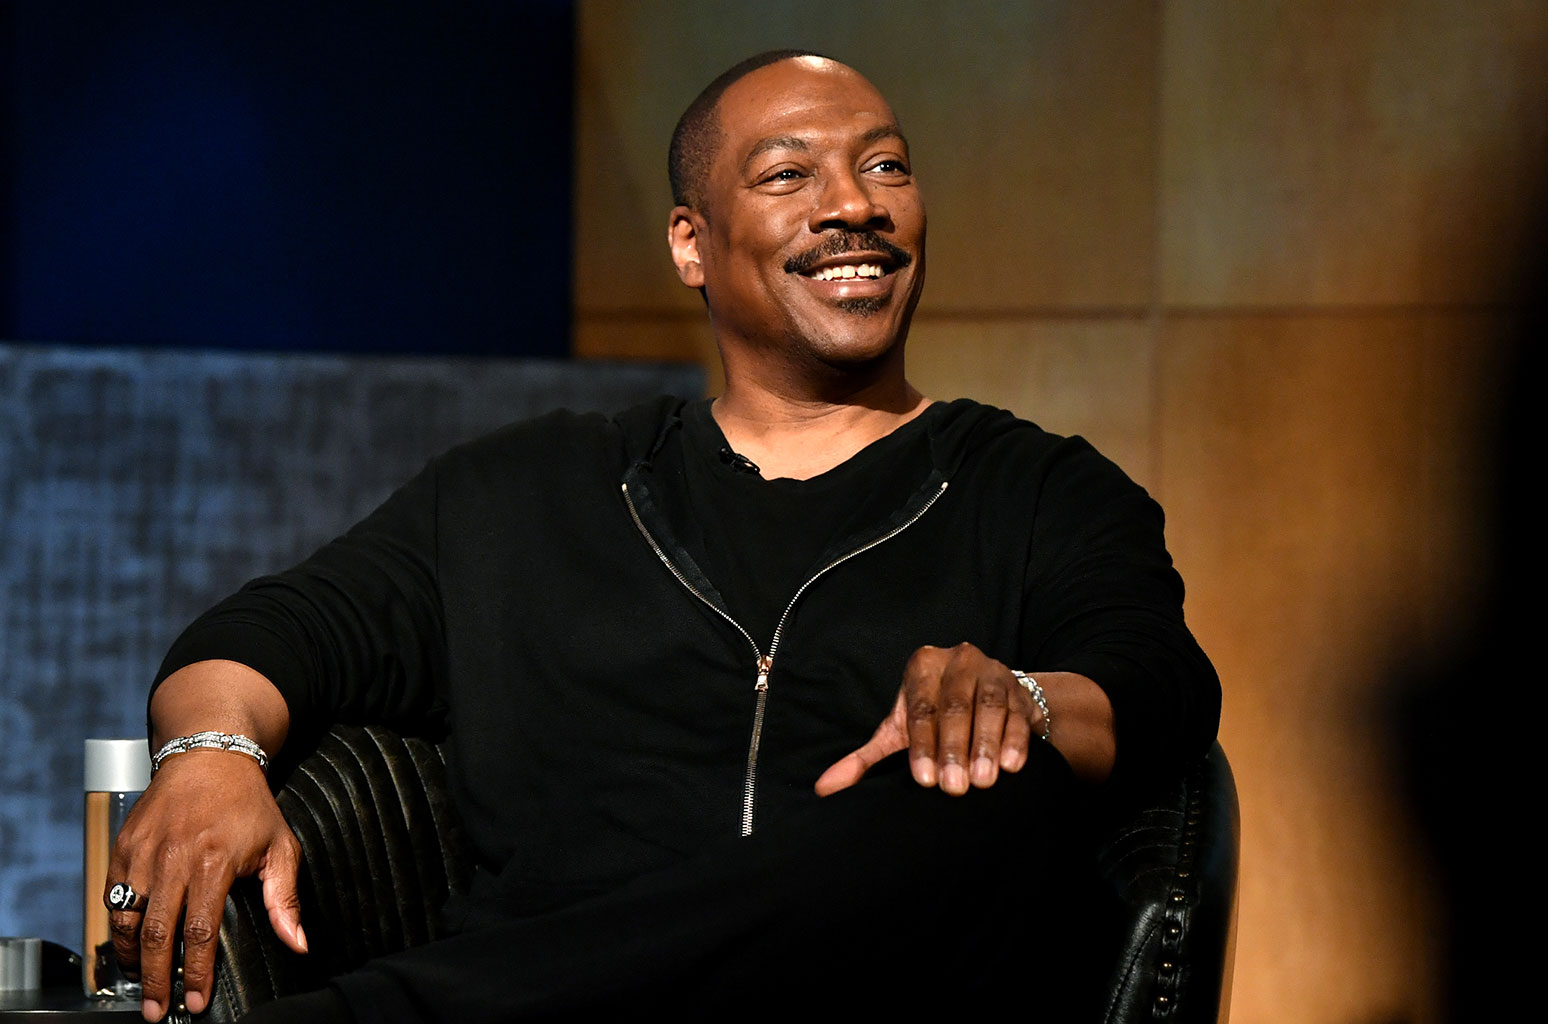 You Have to Watch Eddie Murphy's Epic Return to 'SNL' in Black &amp; White Promo - www.billboard.com